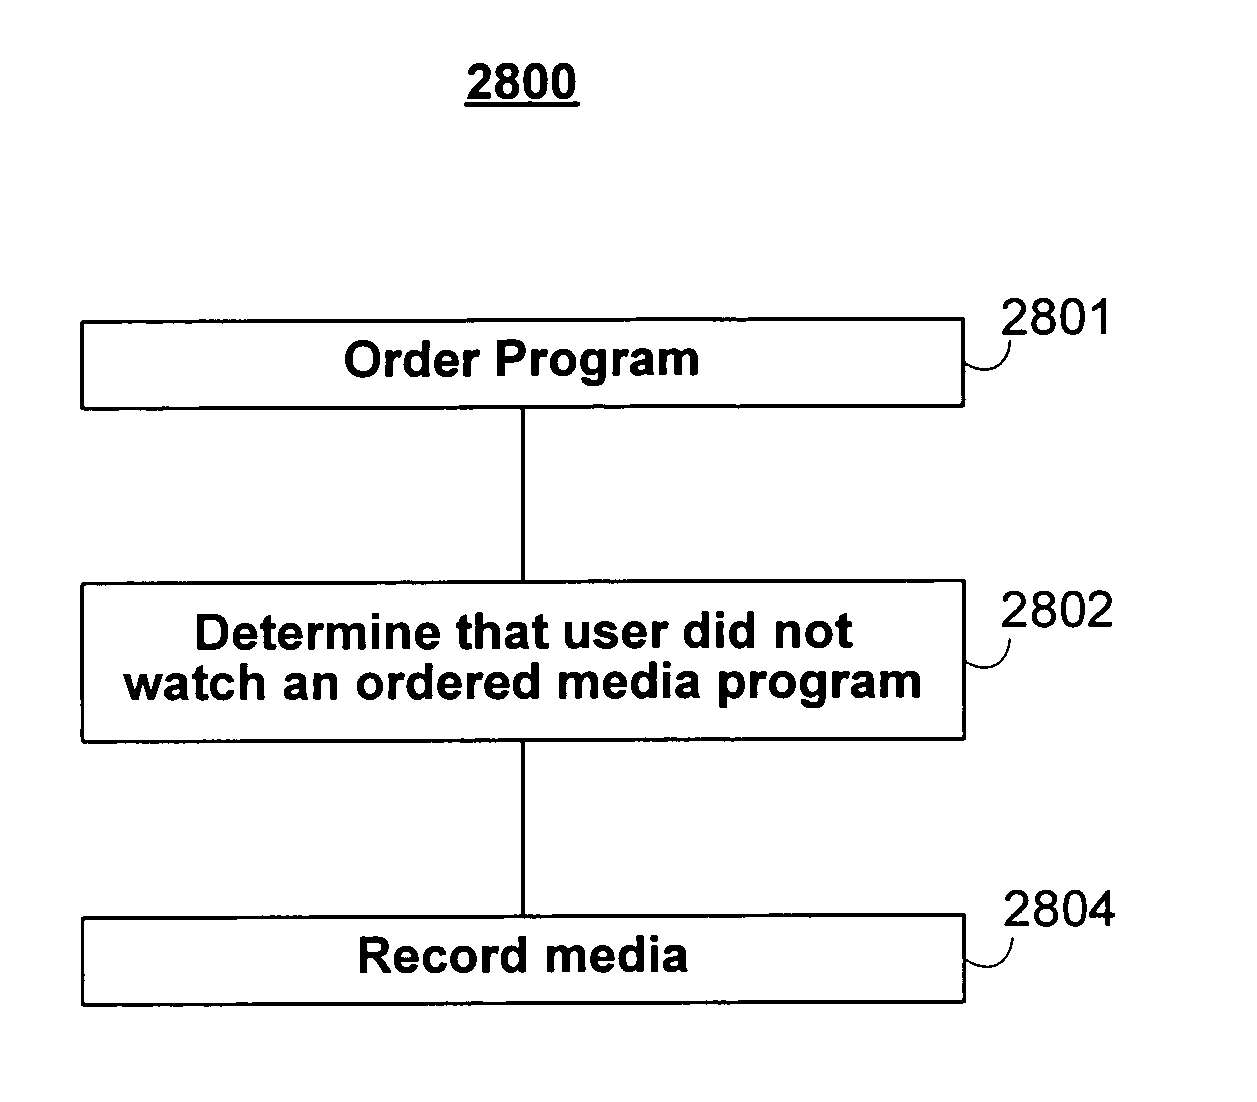 Systems and methods for providing an on-demand media portal and grid guide